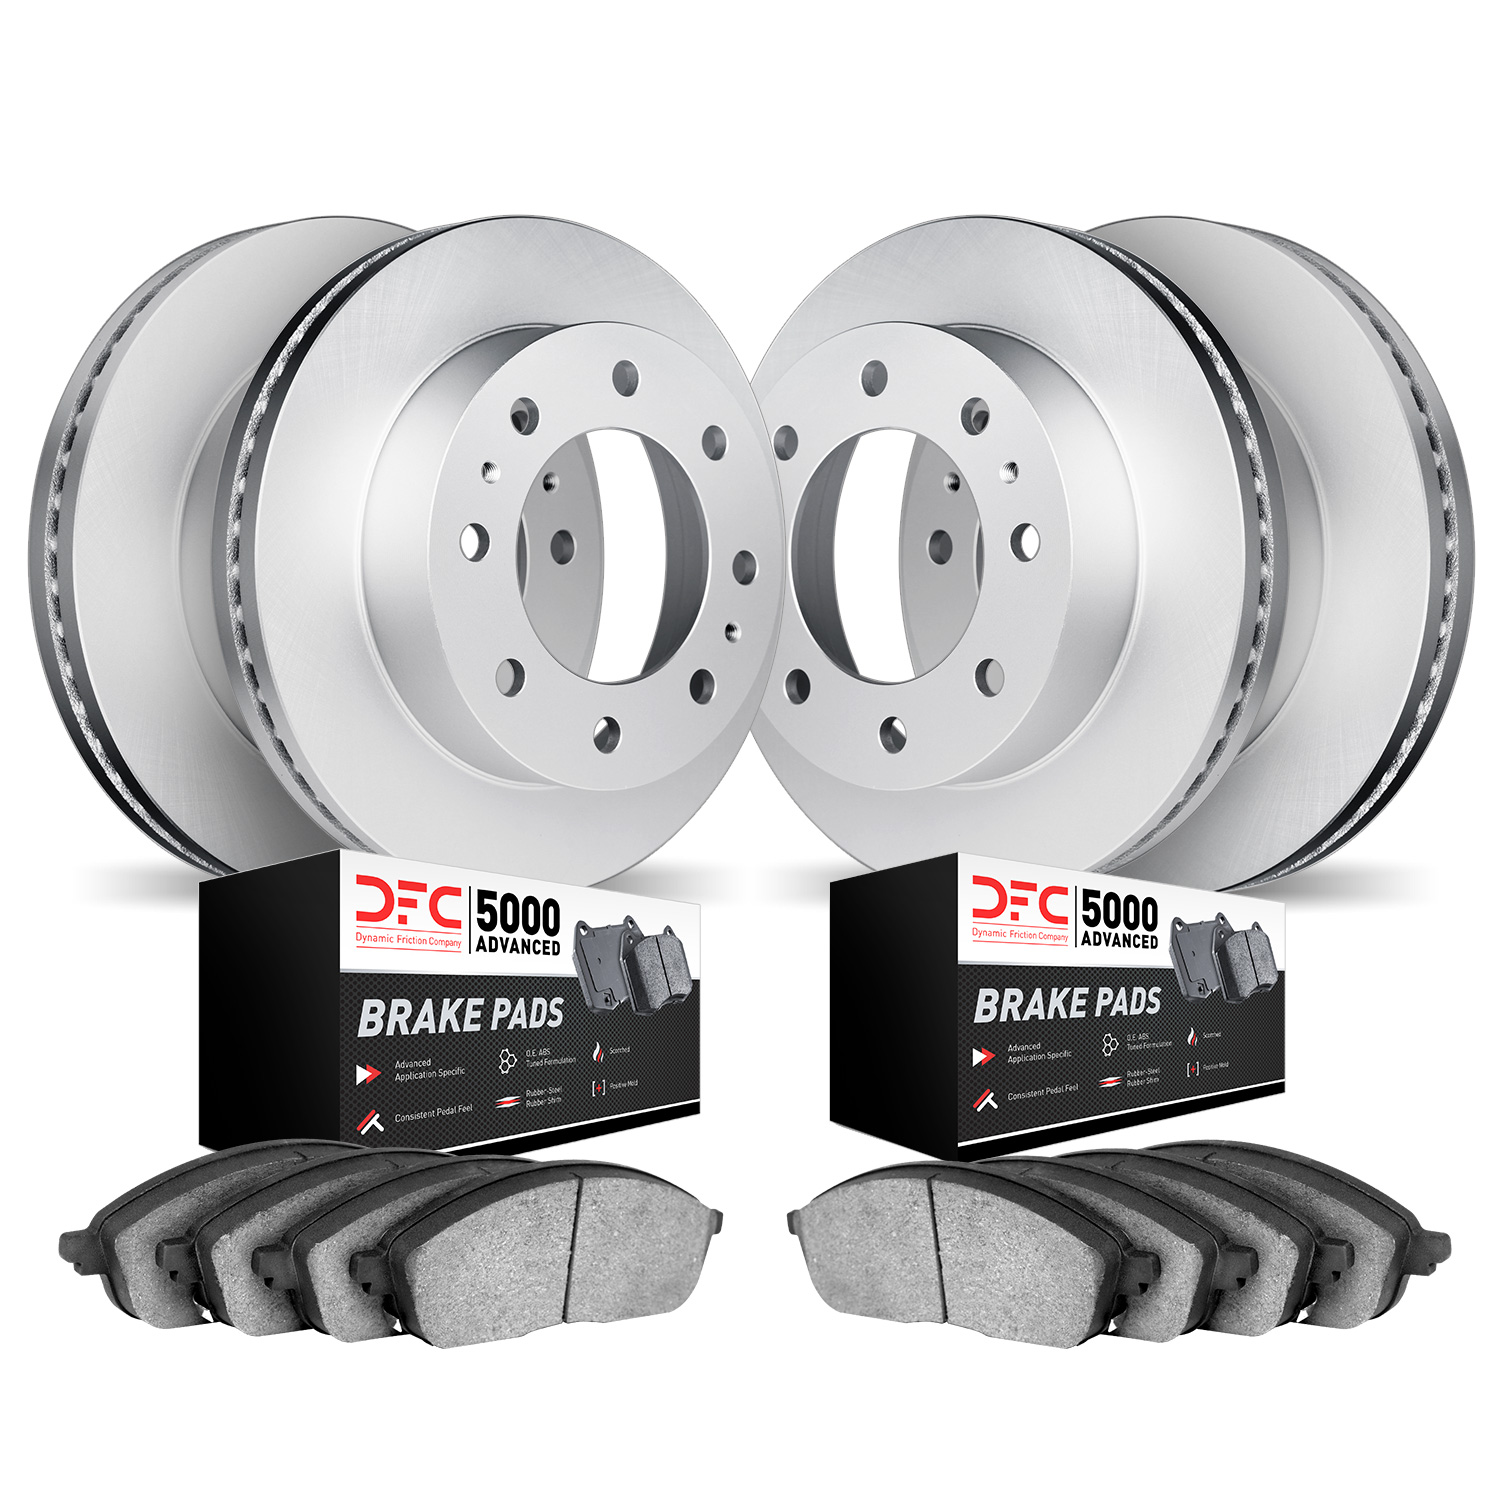 4504-48011 Geospec Brake Rotors w/5000 Advanced Brake Pads Kit, 2003-2017 GM, Position: Front and Rear